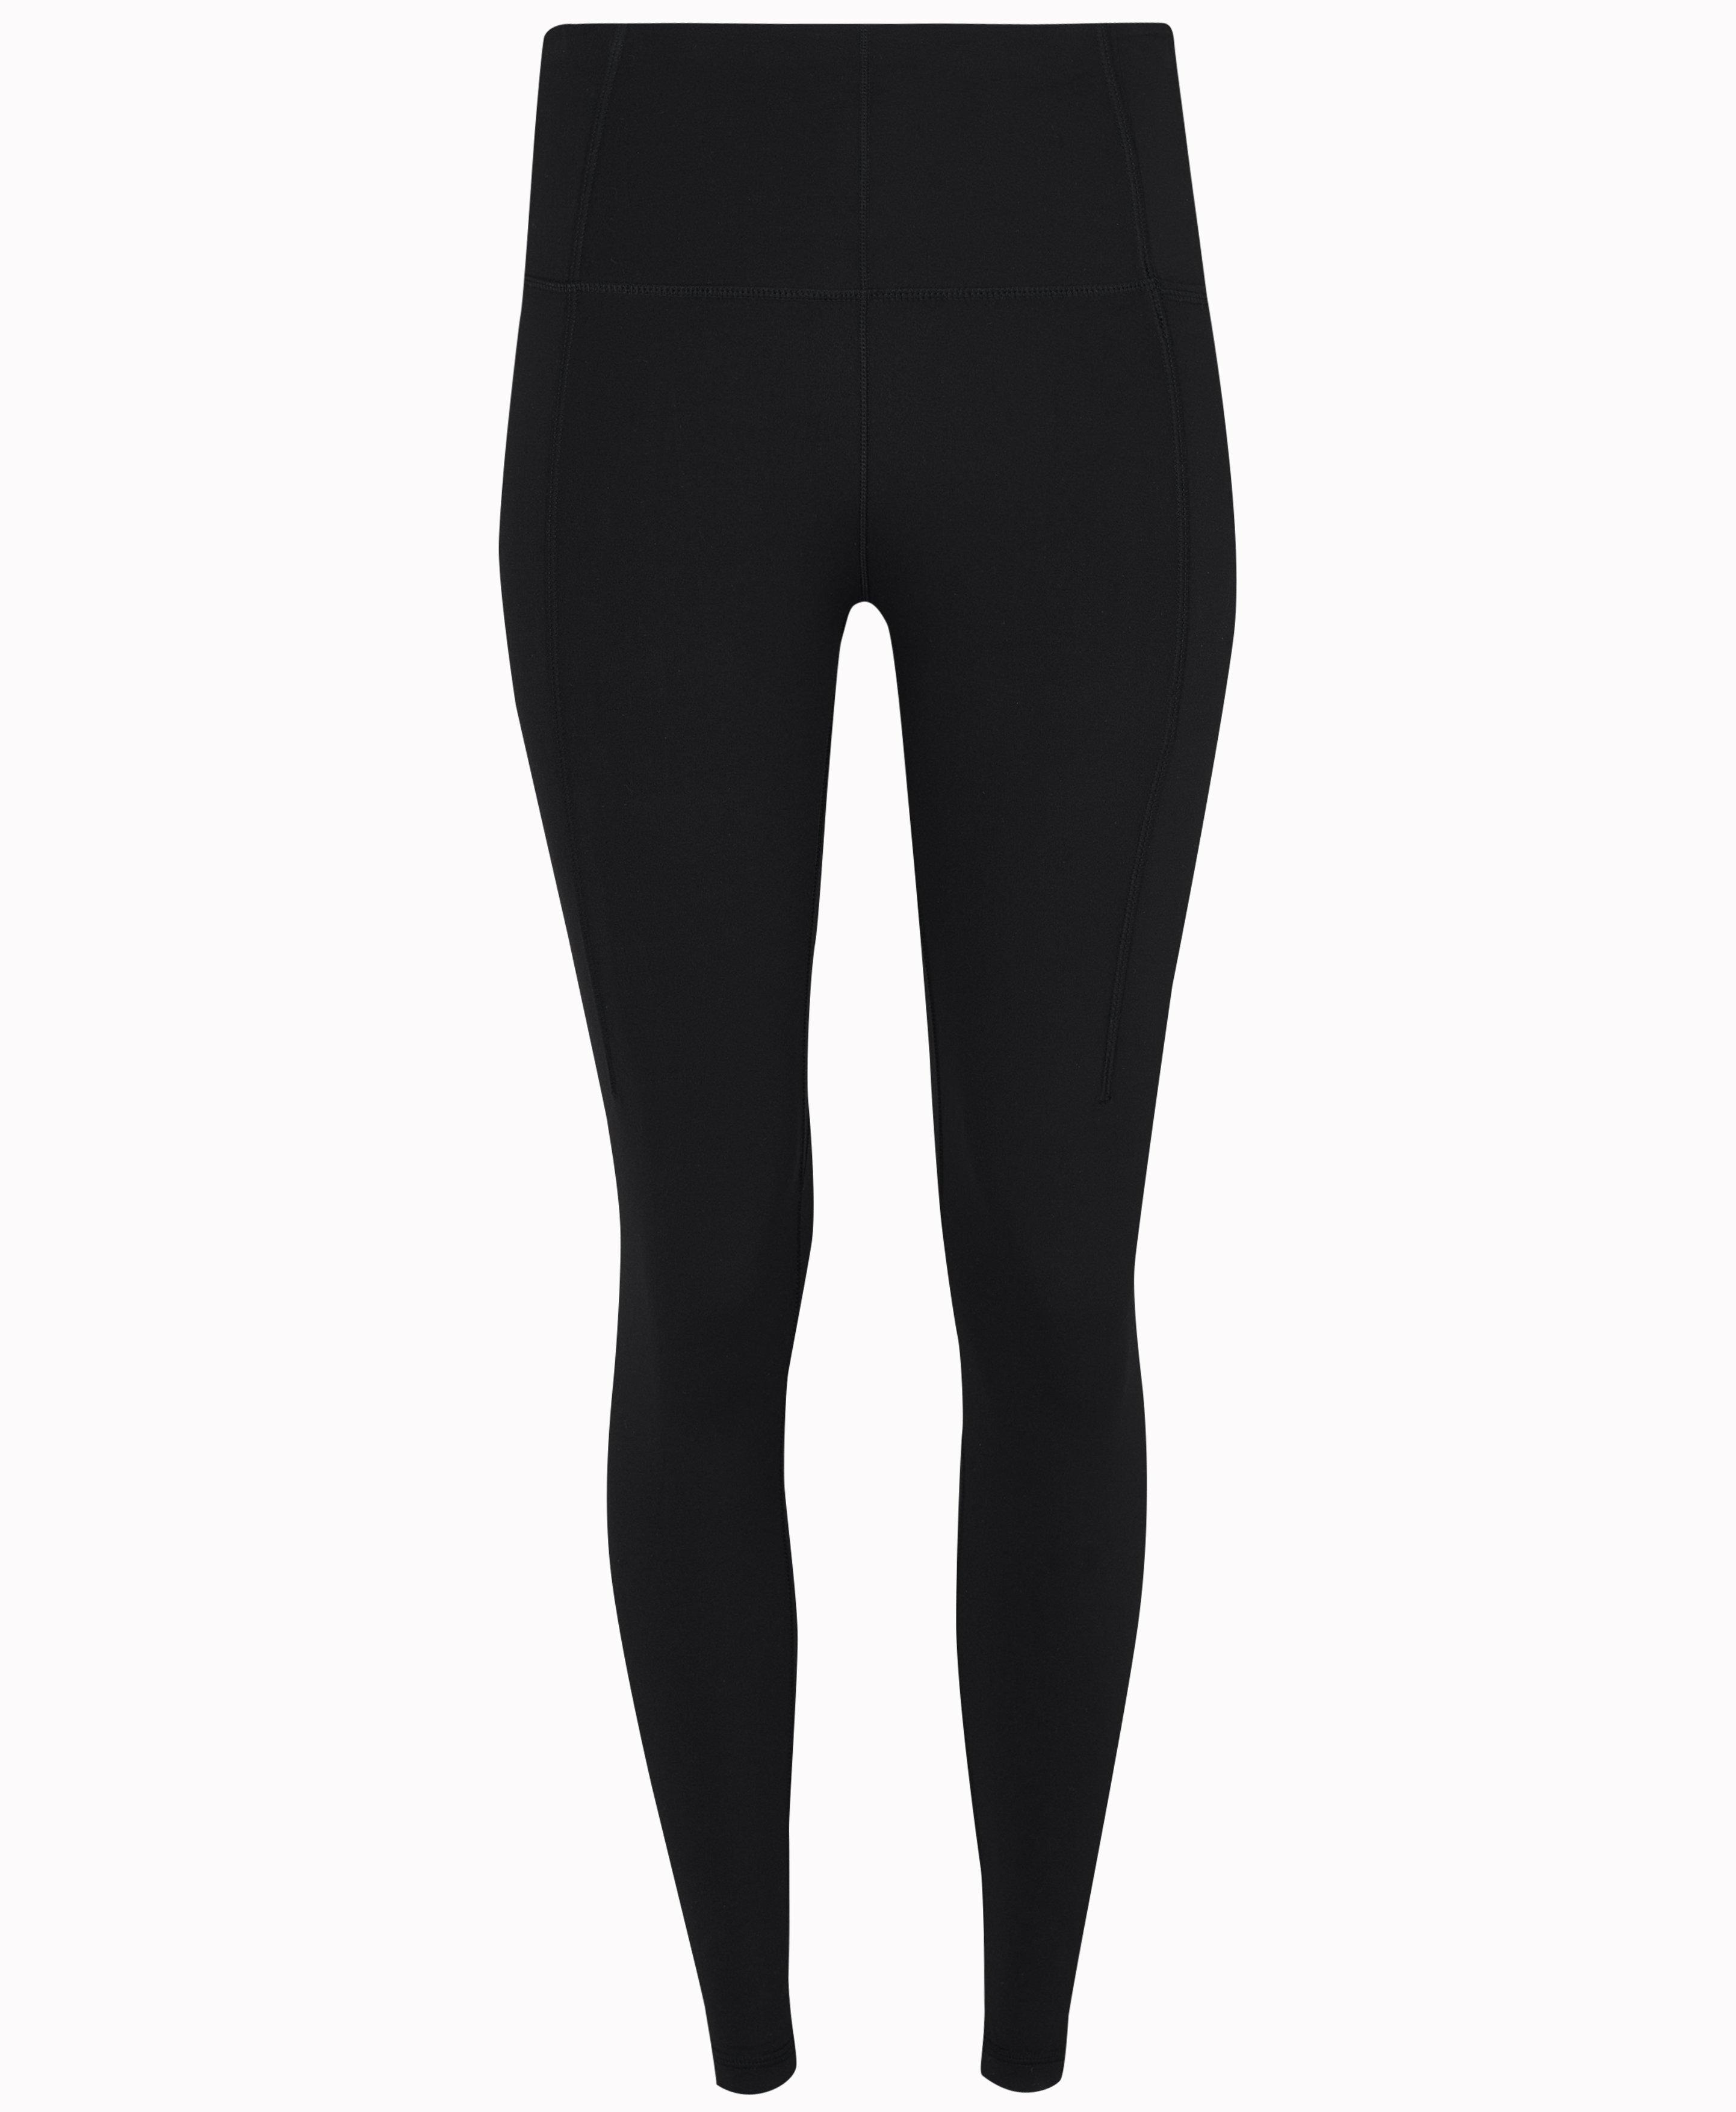 icyzone Legging for Women, No Front Seam, Buttery Soft, 7/8 High Waisted  Squat Proof Yoga Pants for Workout (Black, Small) at  Women's  Clothing store